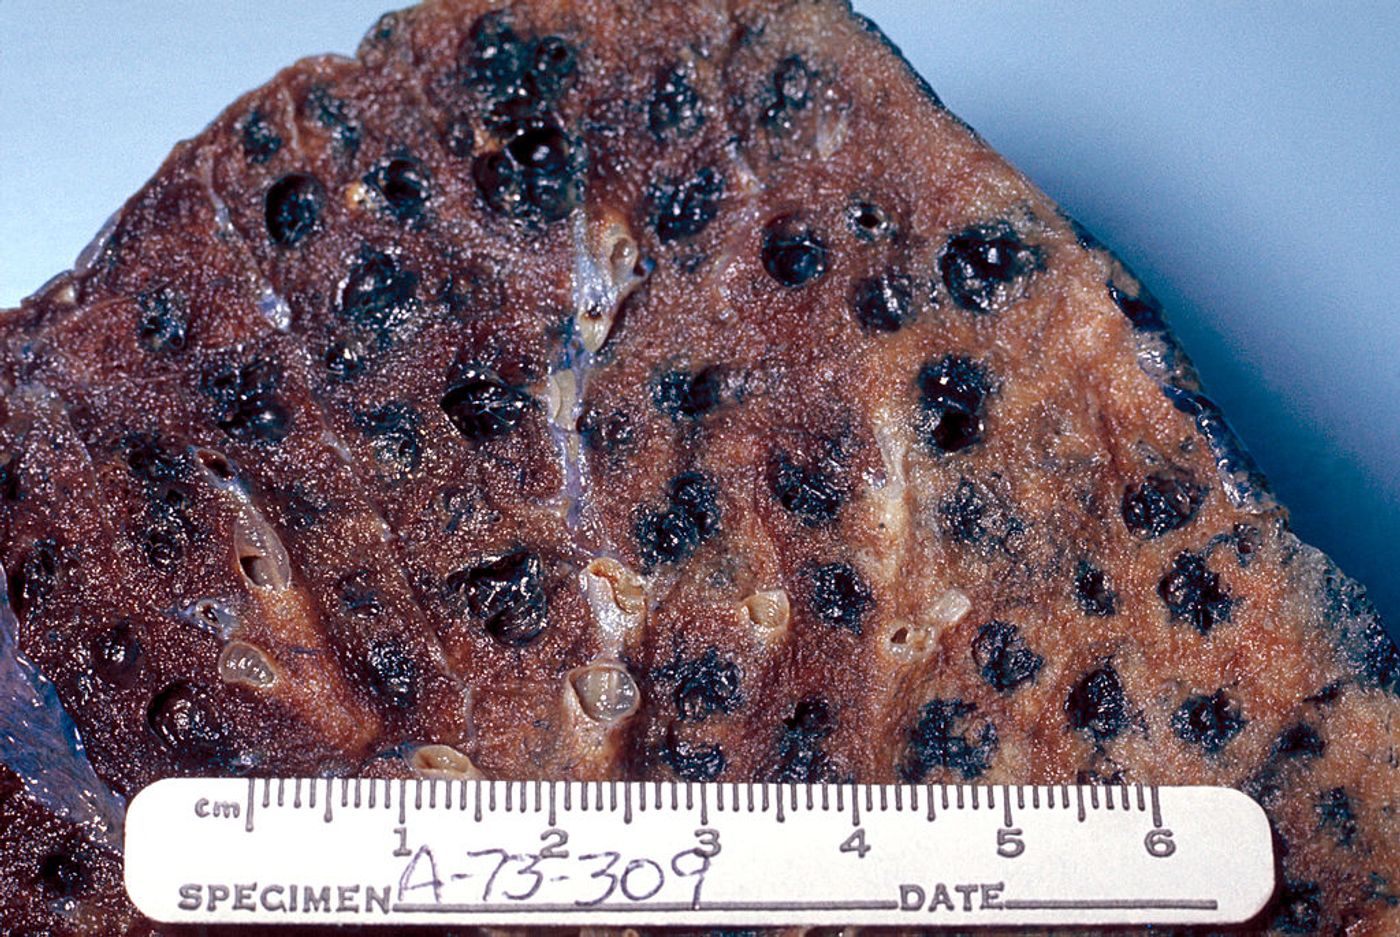 Gross pathology of lung showing centrilobular emphysema characteristic of smoking. Closeup of fixed, cut surface shows multiple cavities lined by heavy black carbon deposits. / Credit: Wikimedia/Dr. Edwin P. Ewing, Jr.